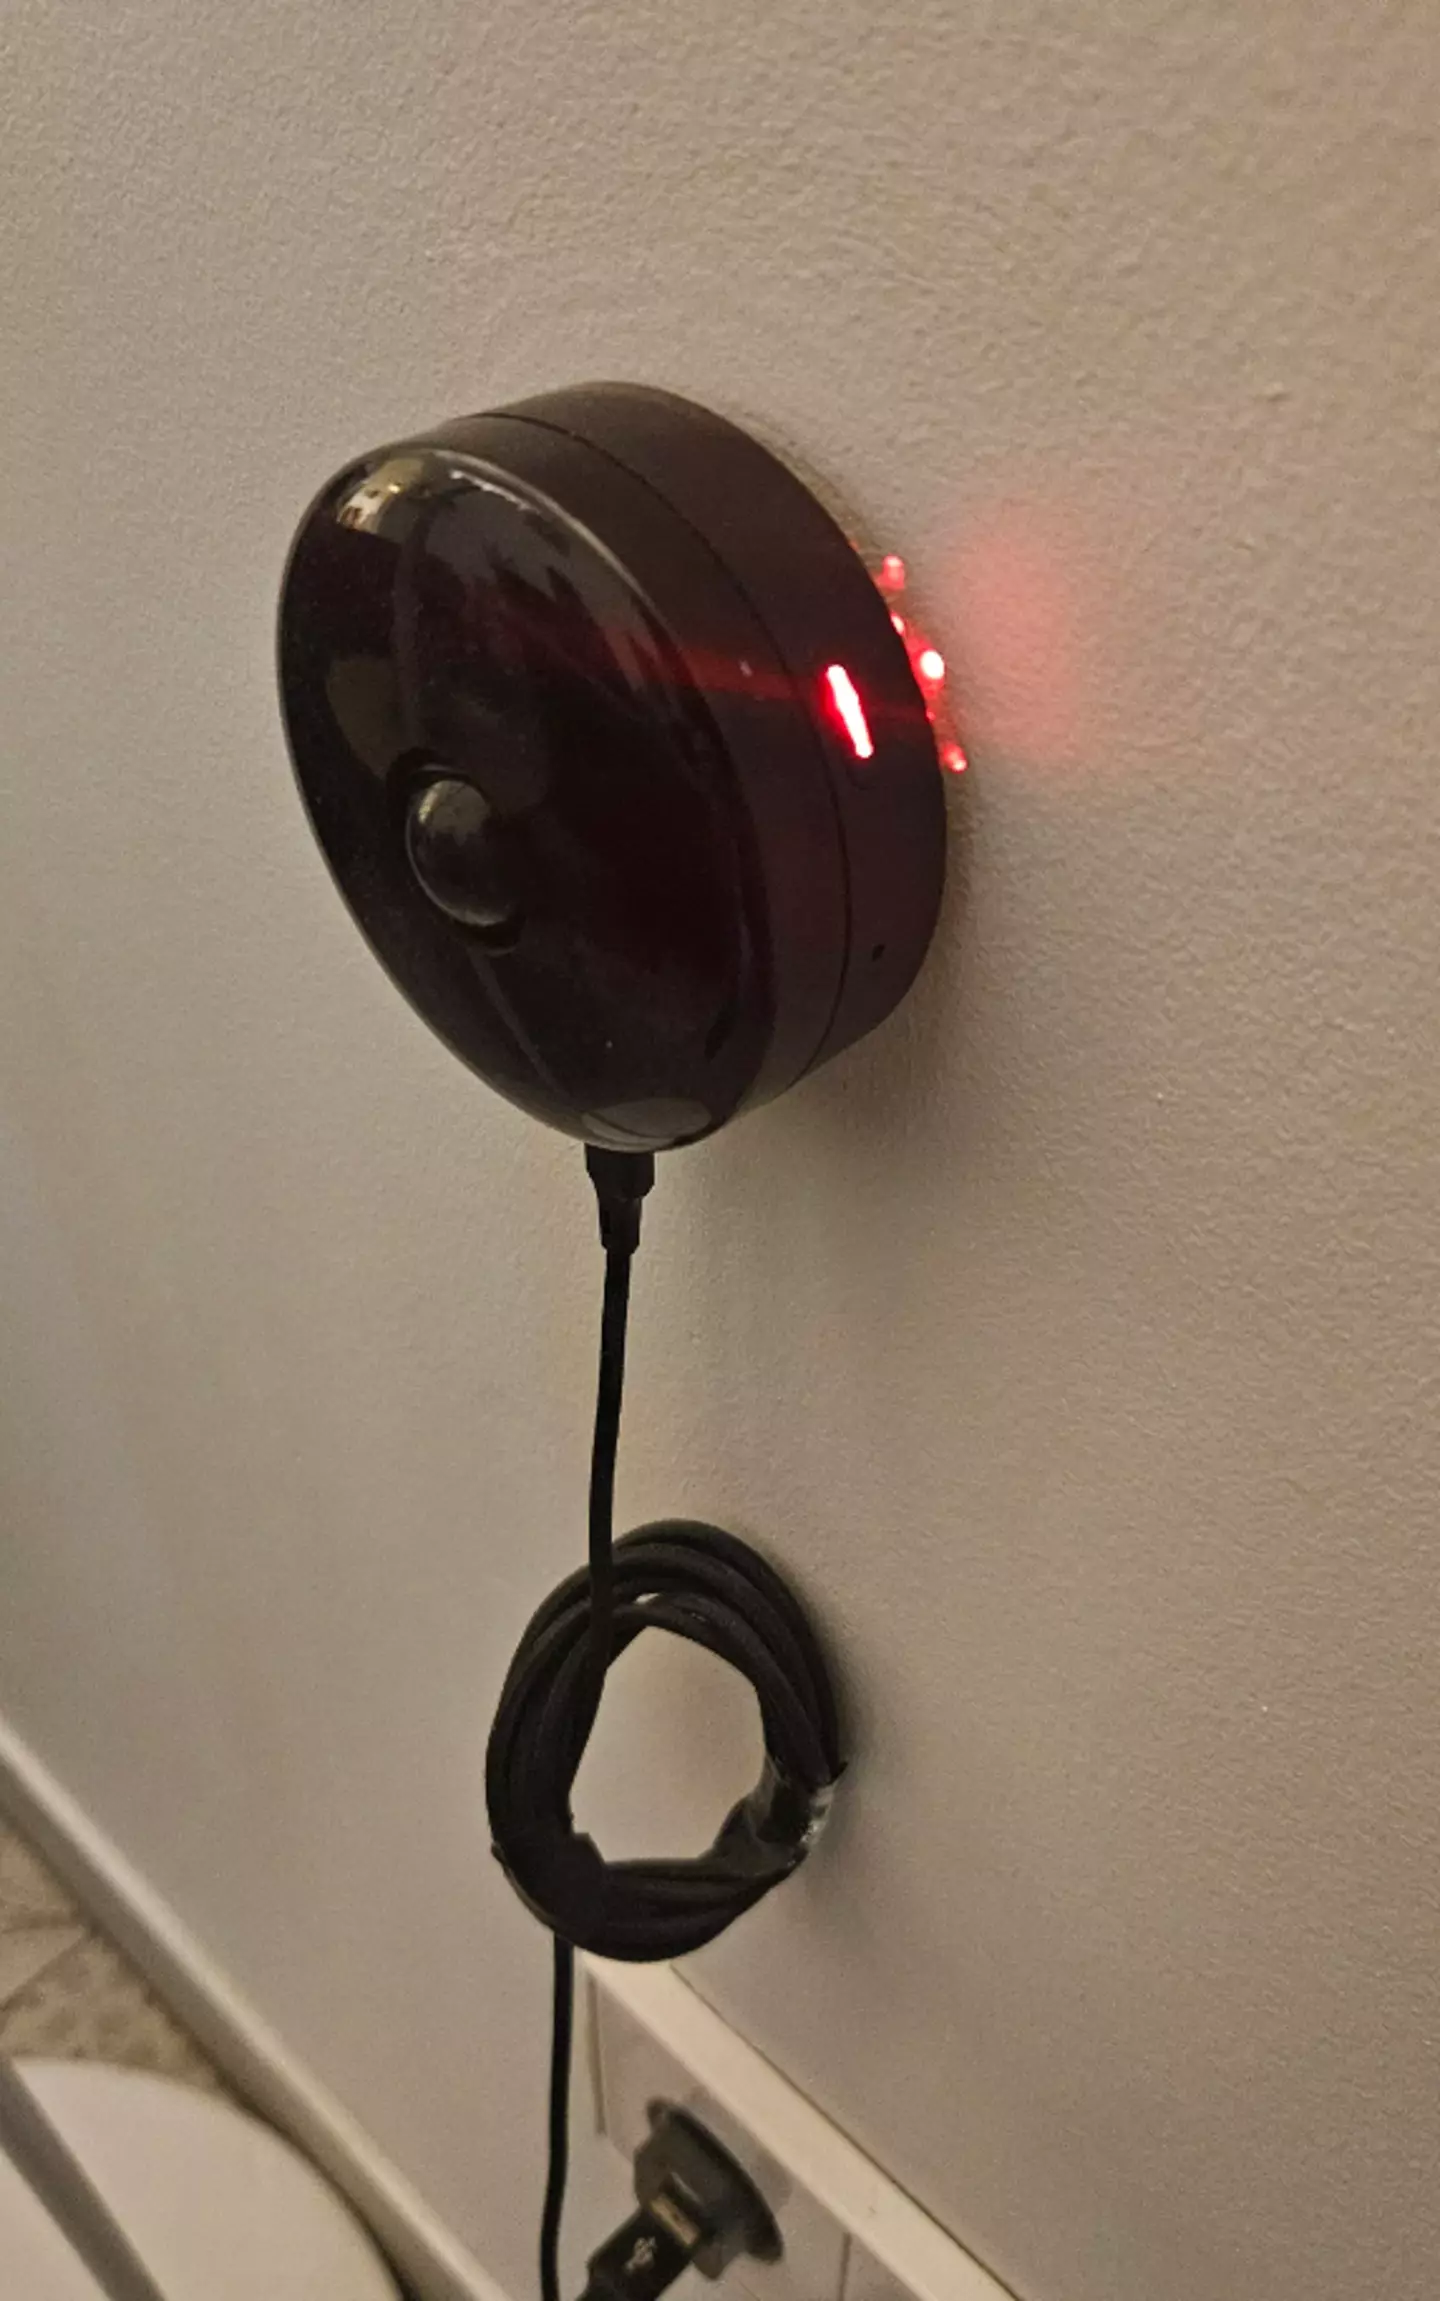 Some thought it was a motion detector for lights. (Reddit)